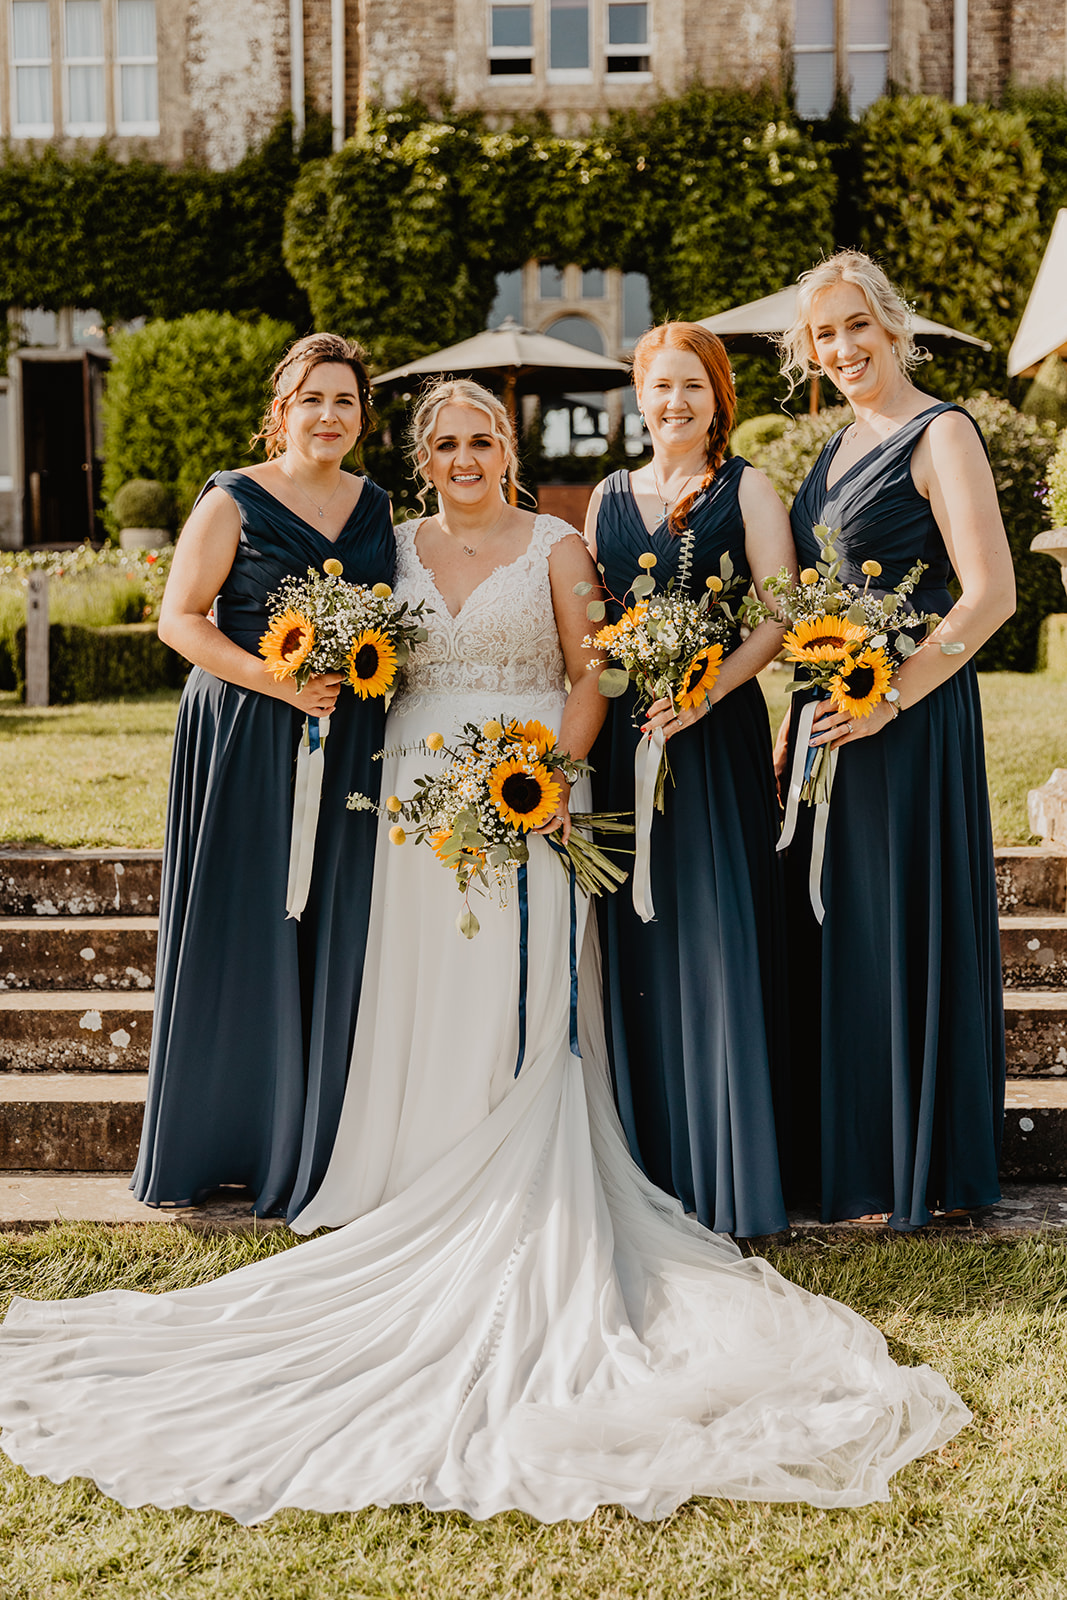 Bride and bridesmaids at a South Lodge, Sussex Wedding. By Olive Joy Photography